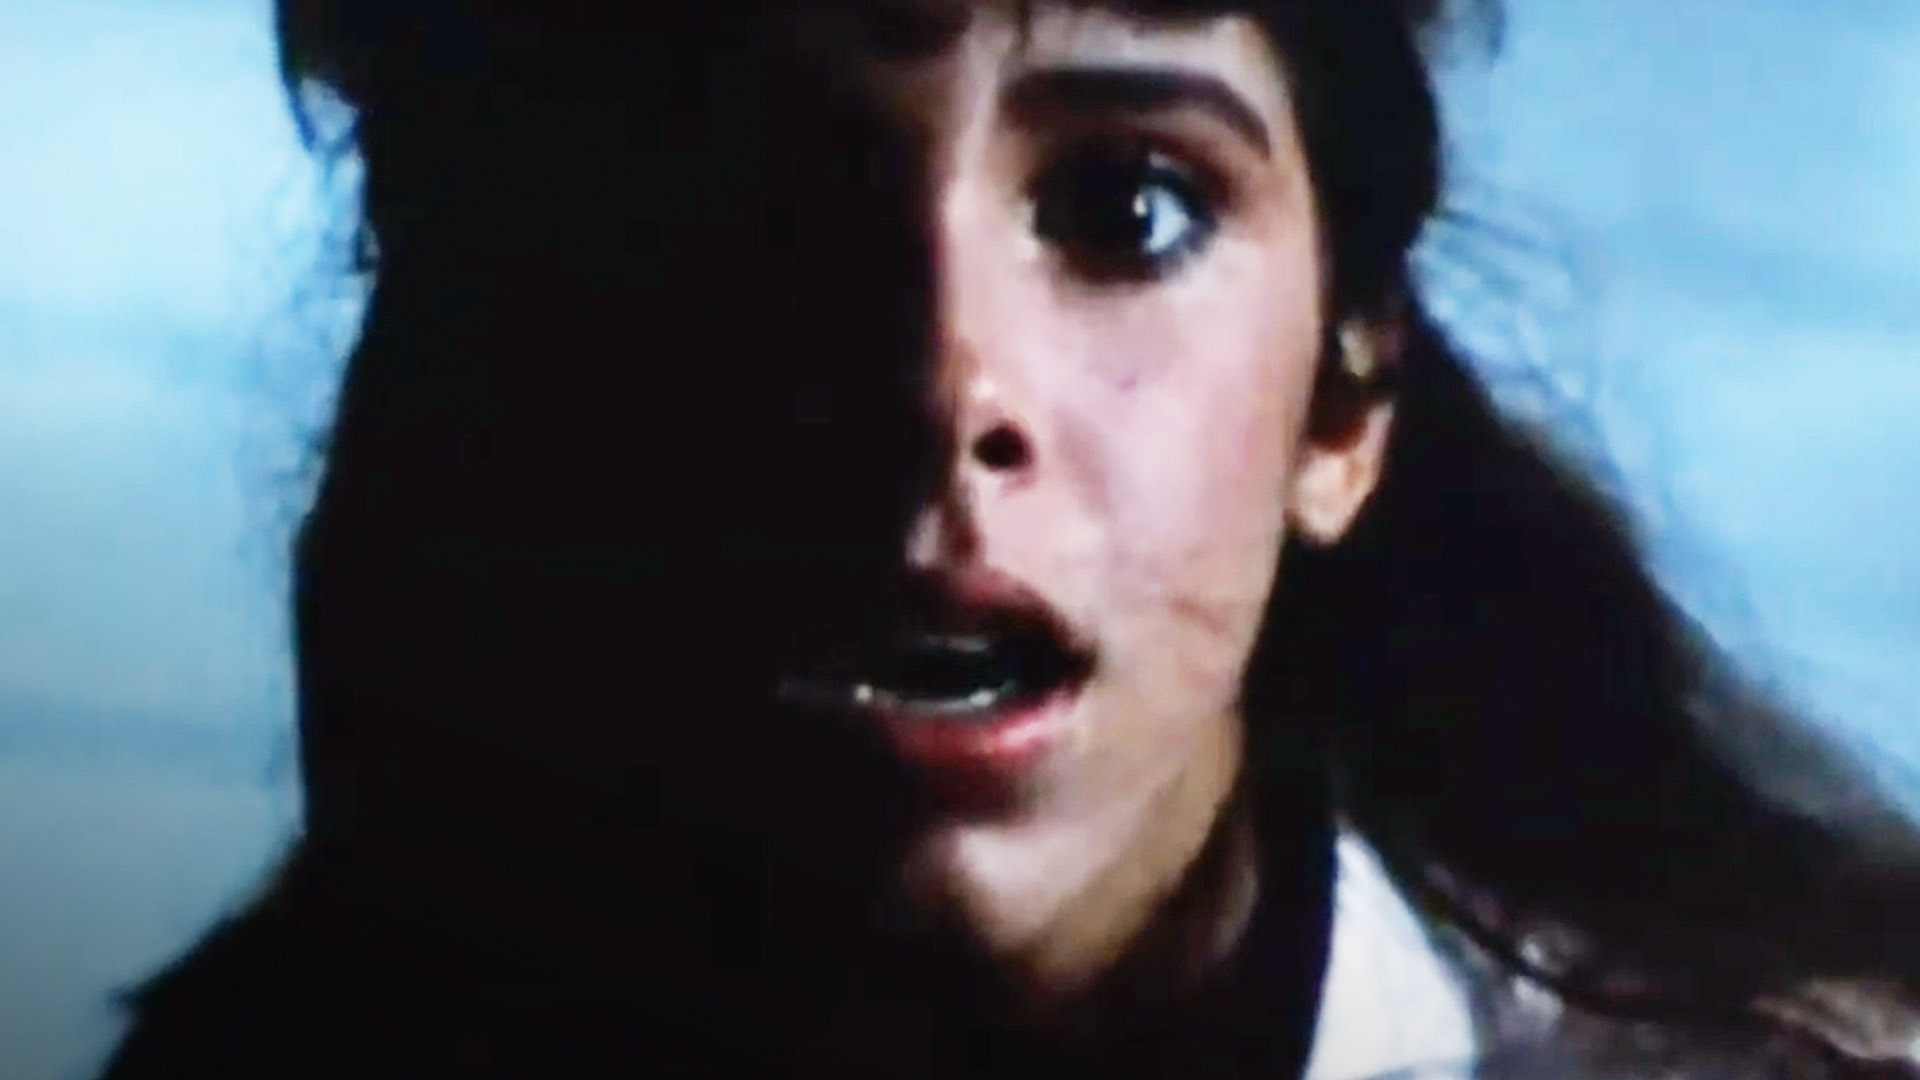 Great Performances in Horror: Desiree Gould as Aunt Martha in